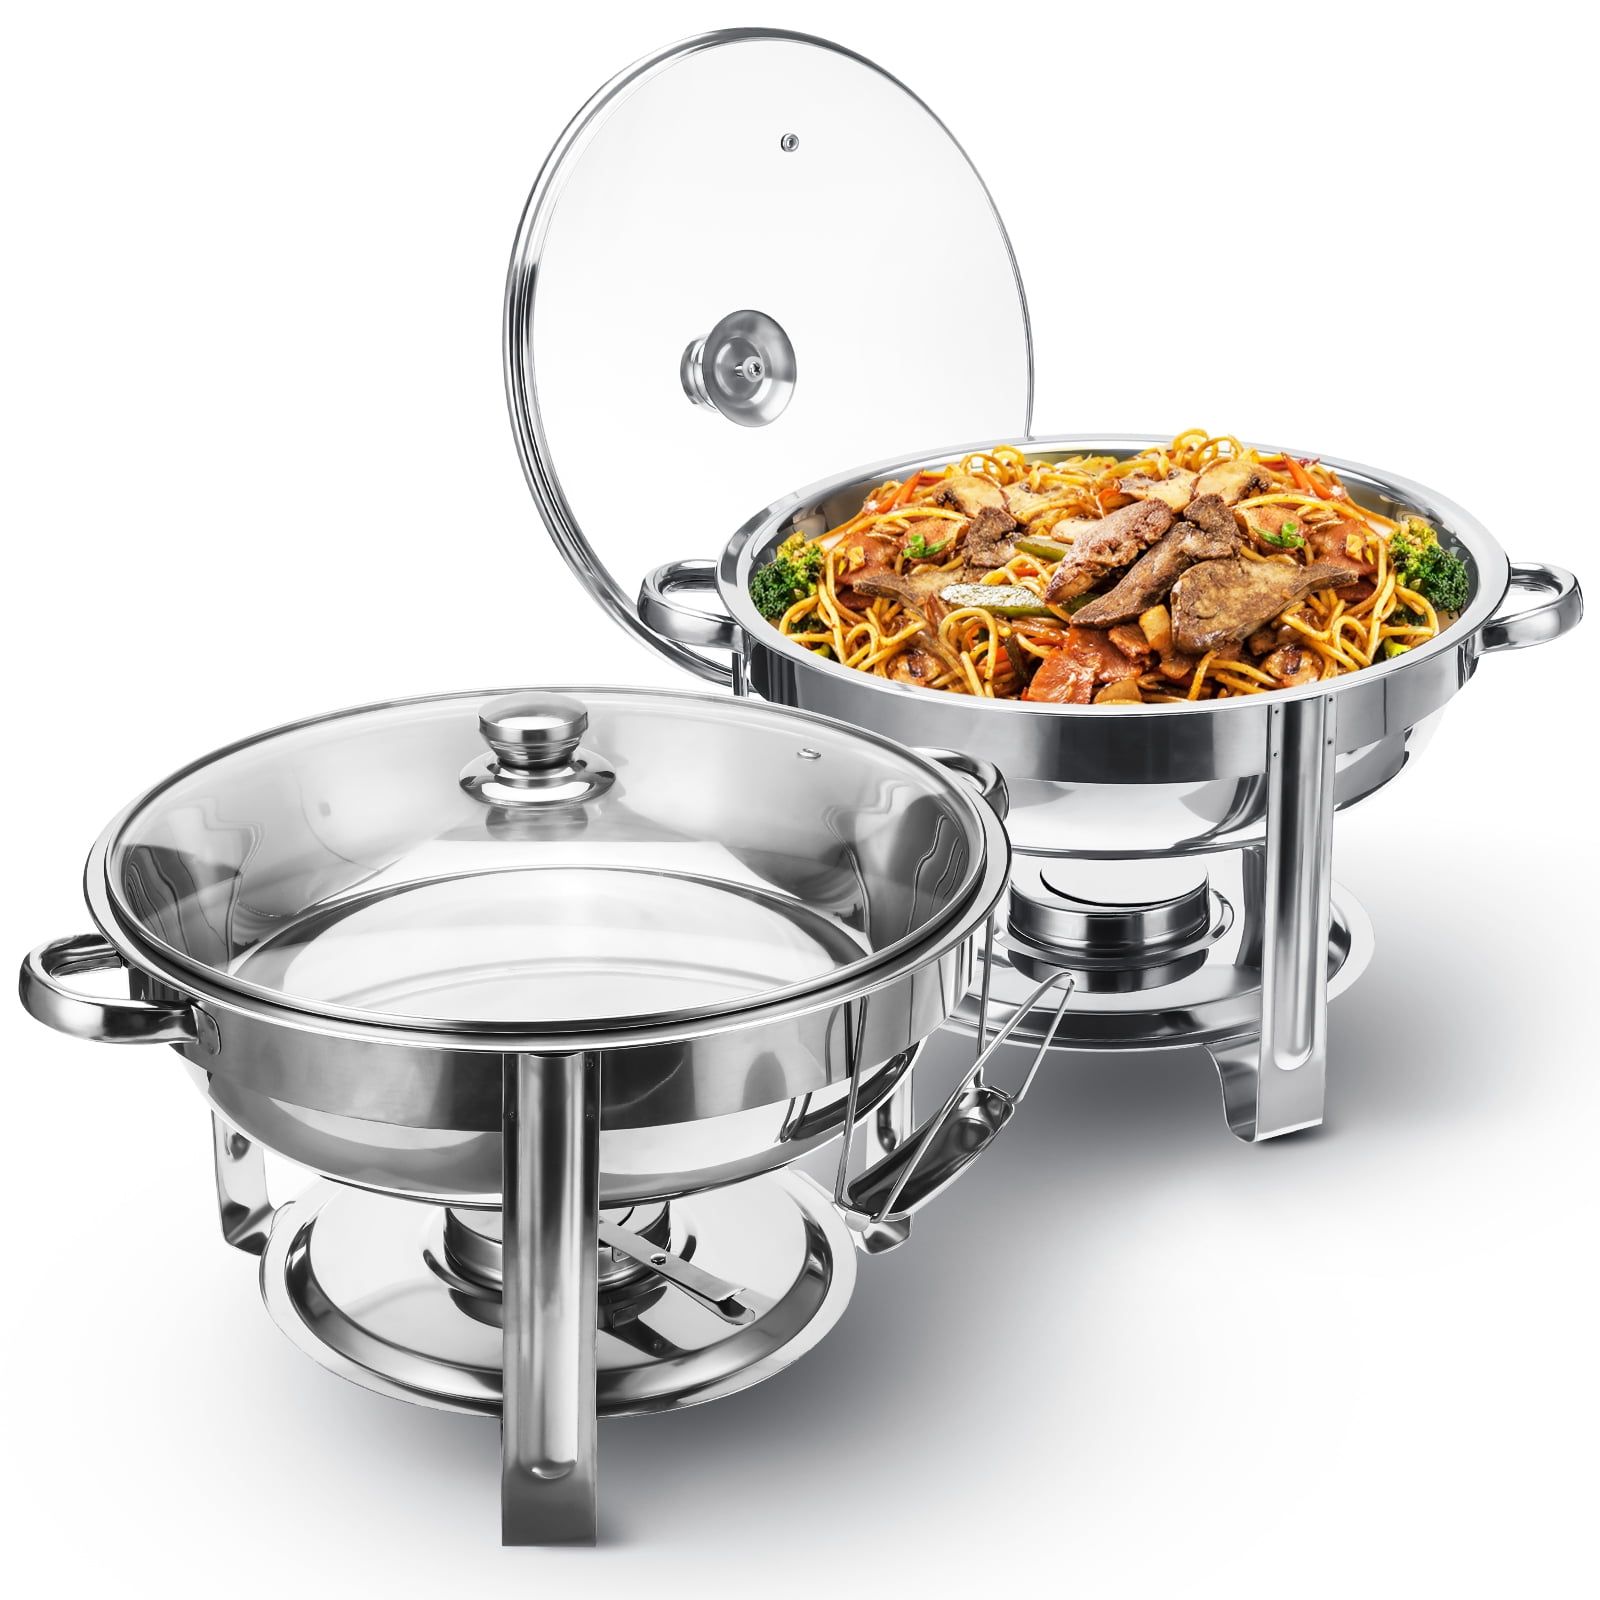 11-Inch Stainless Steel Chafer Round Chafing Dish 3-Quart Thicken Durable Frame with Lid and Alcohol Furnace Holder for Catering Buffet Warmer Tray Kitchen Party Dining Gold 